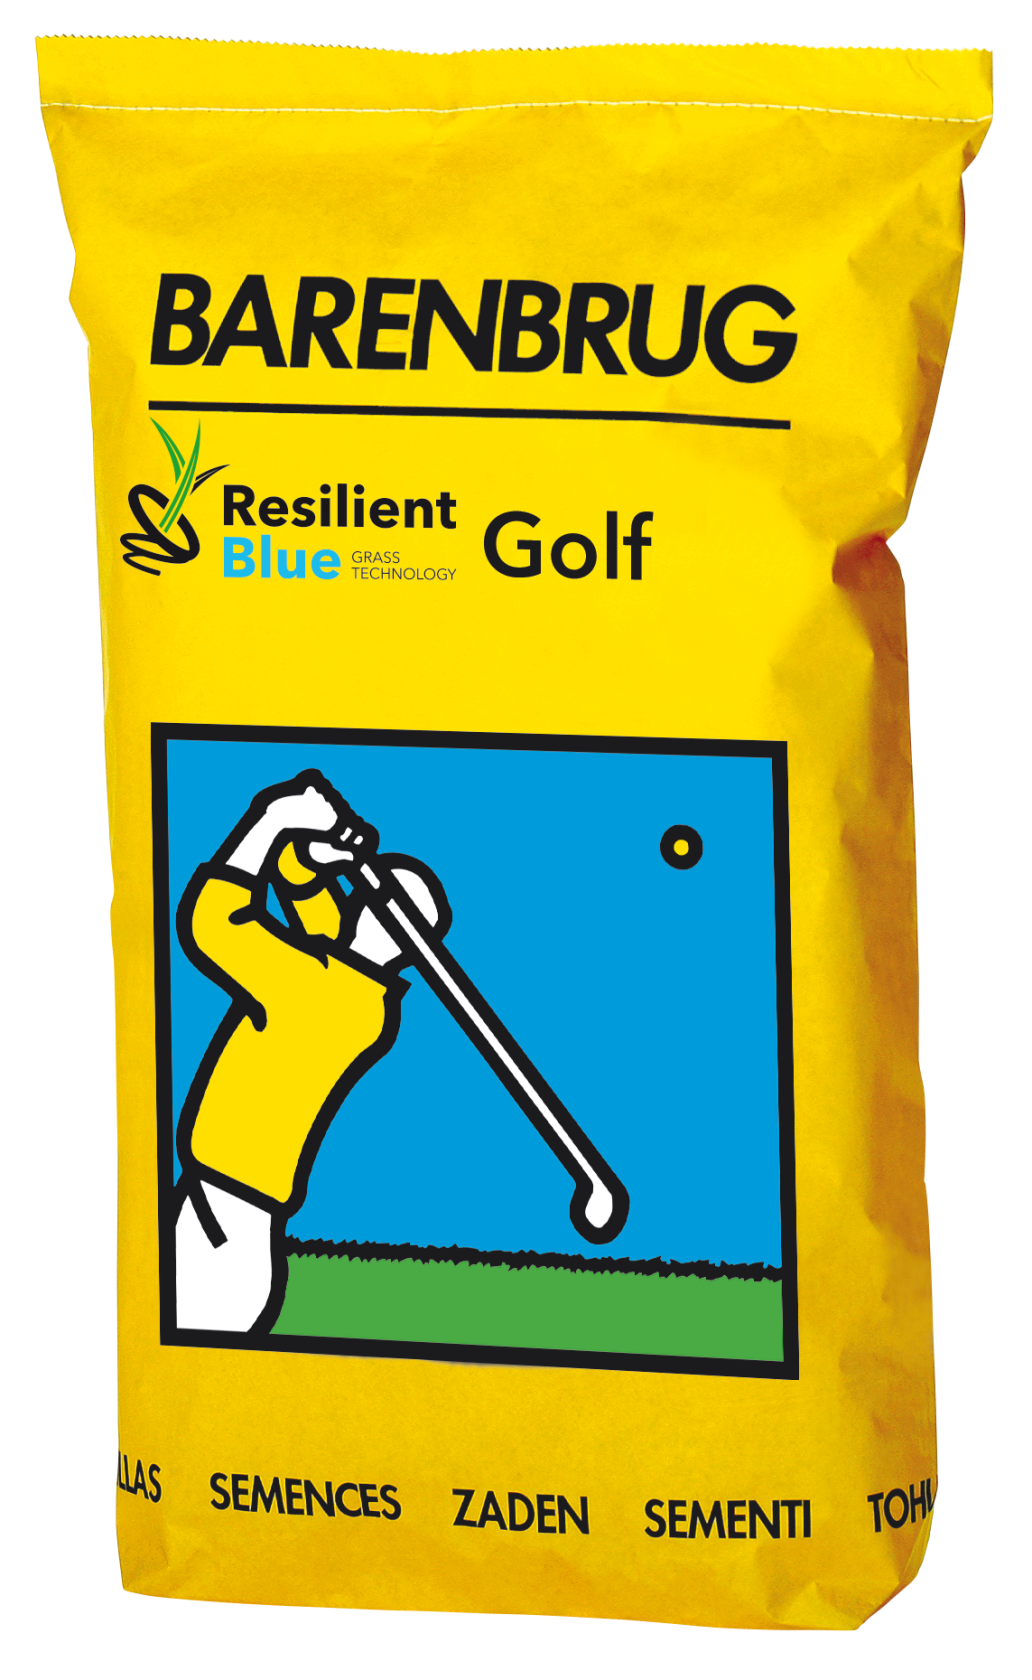 Resilient Blue Golf 15kg - Extremely strong grass against drought and self-healing with YJWM